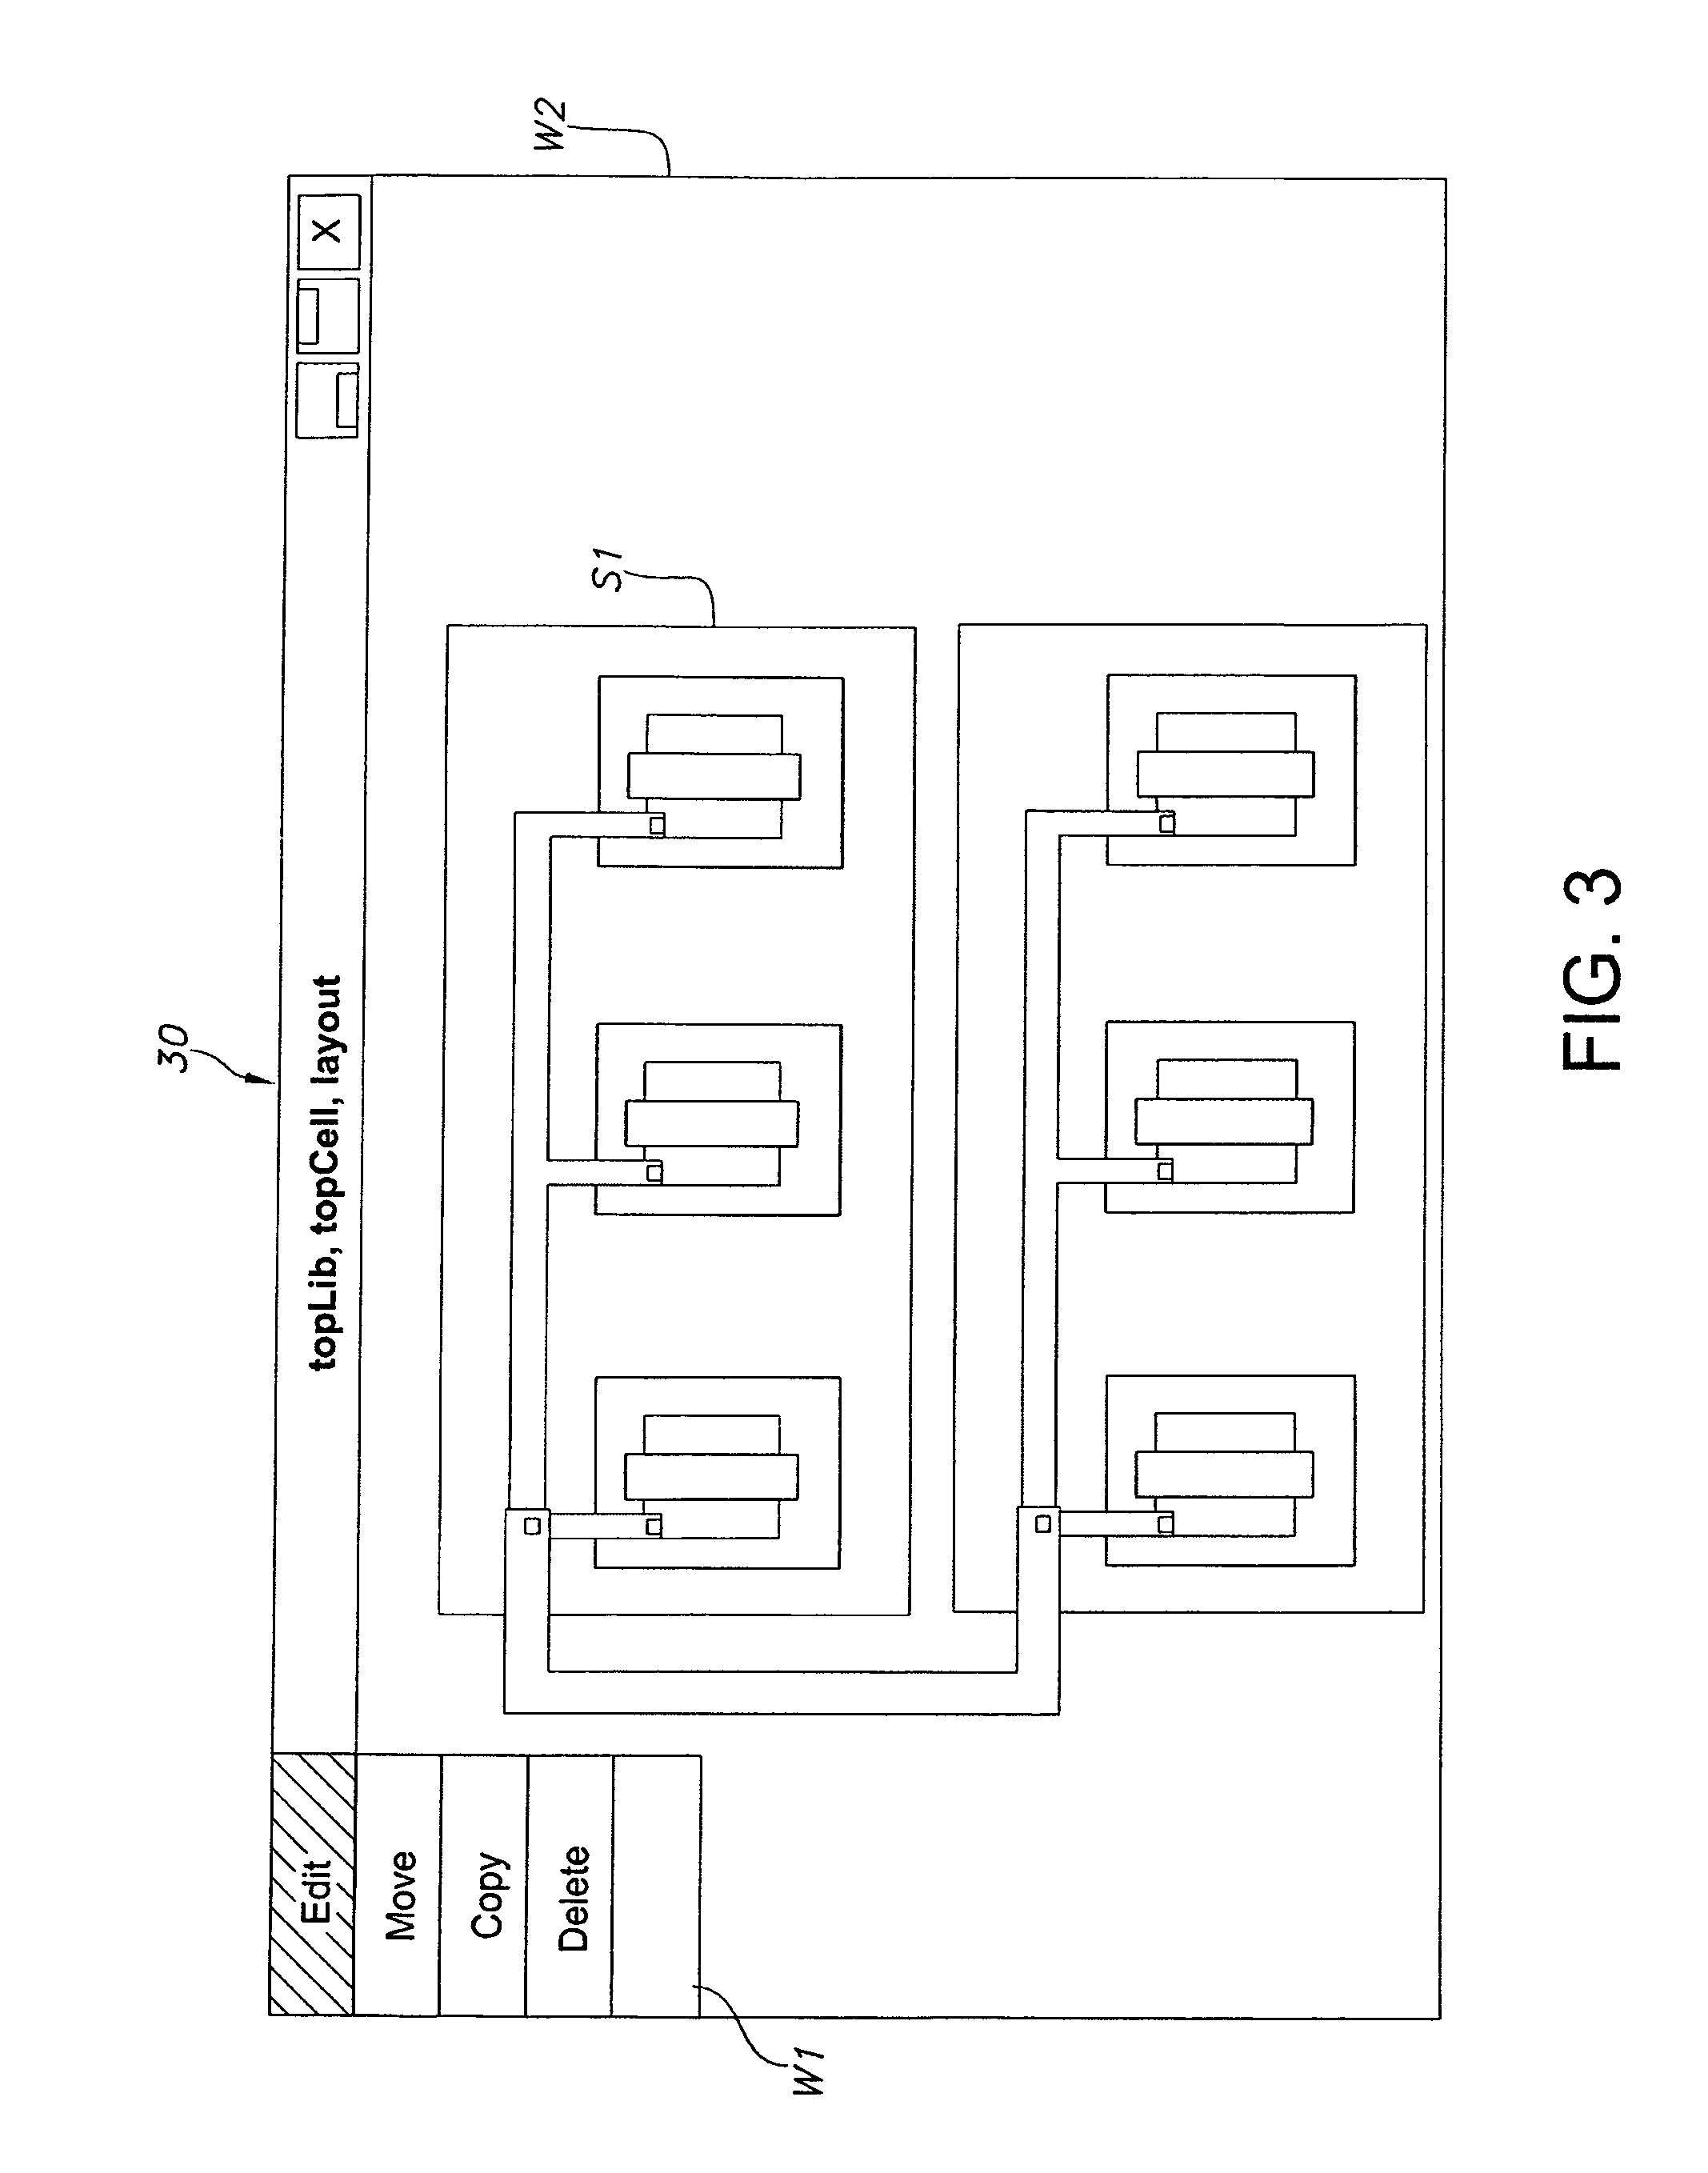 Systems and methods of editing cells of an electronic circuit design